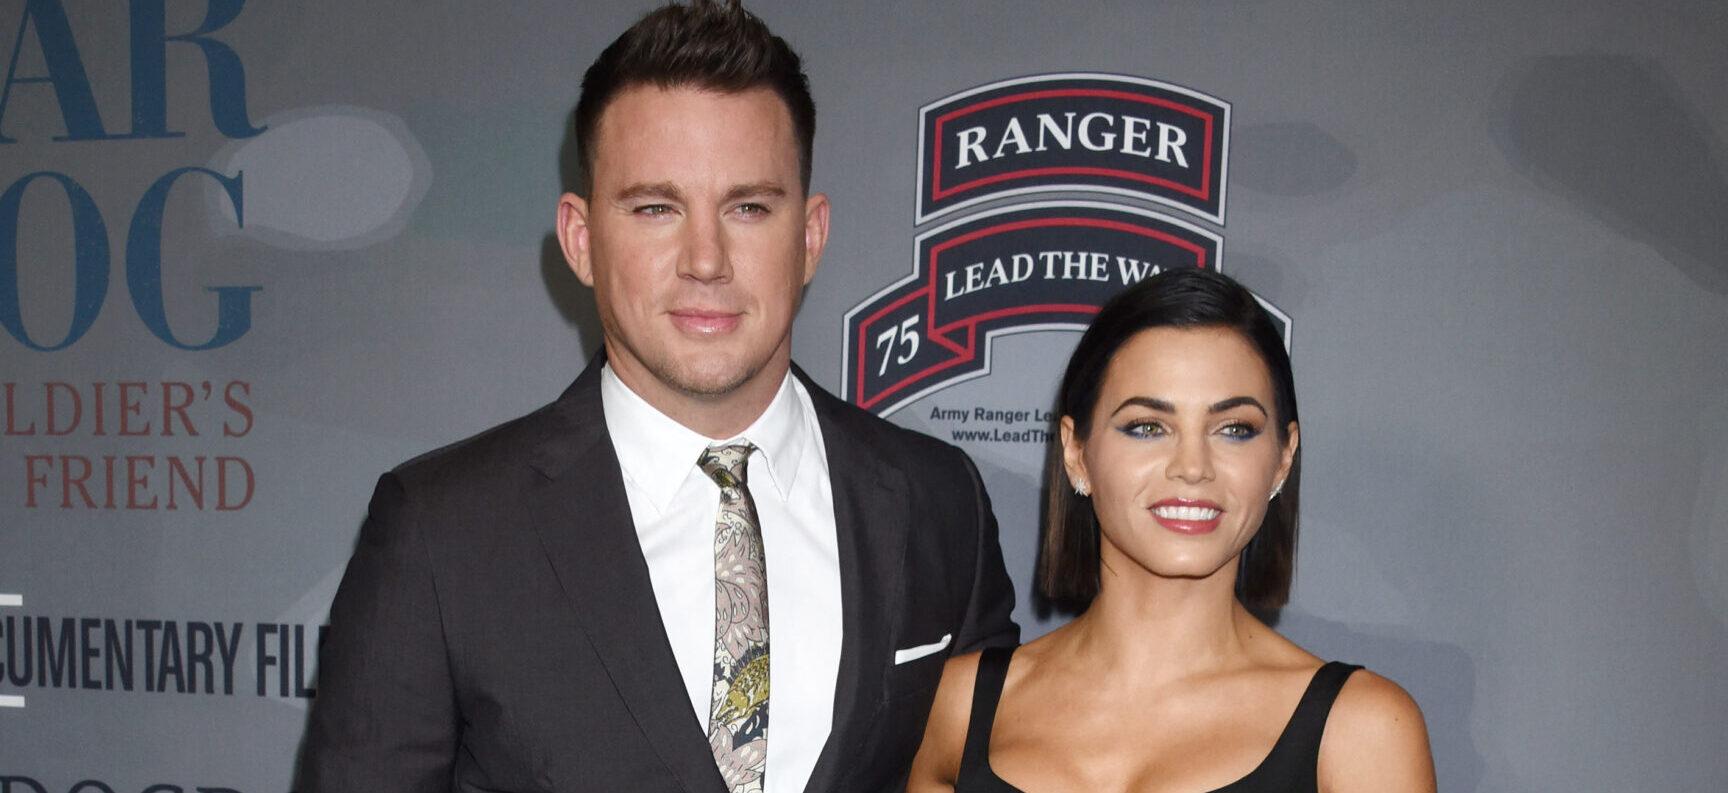 Channing Tatum Accuses Jenna Dewan Of Employing A ‘Delay Tactic’ To Stall Their Financial Settlement